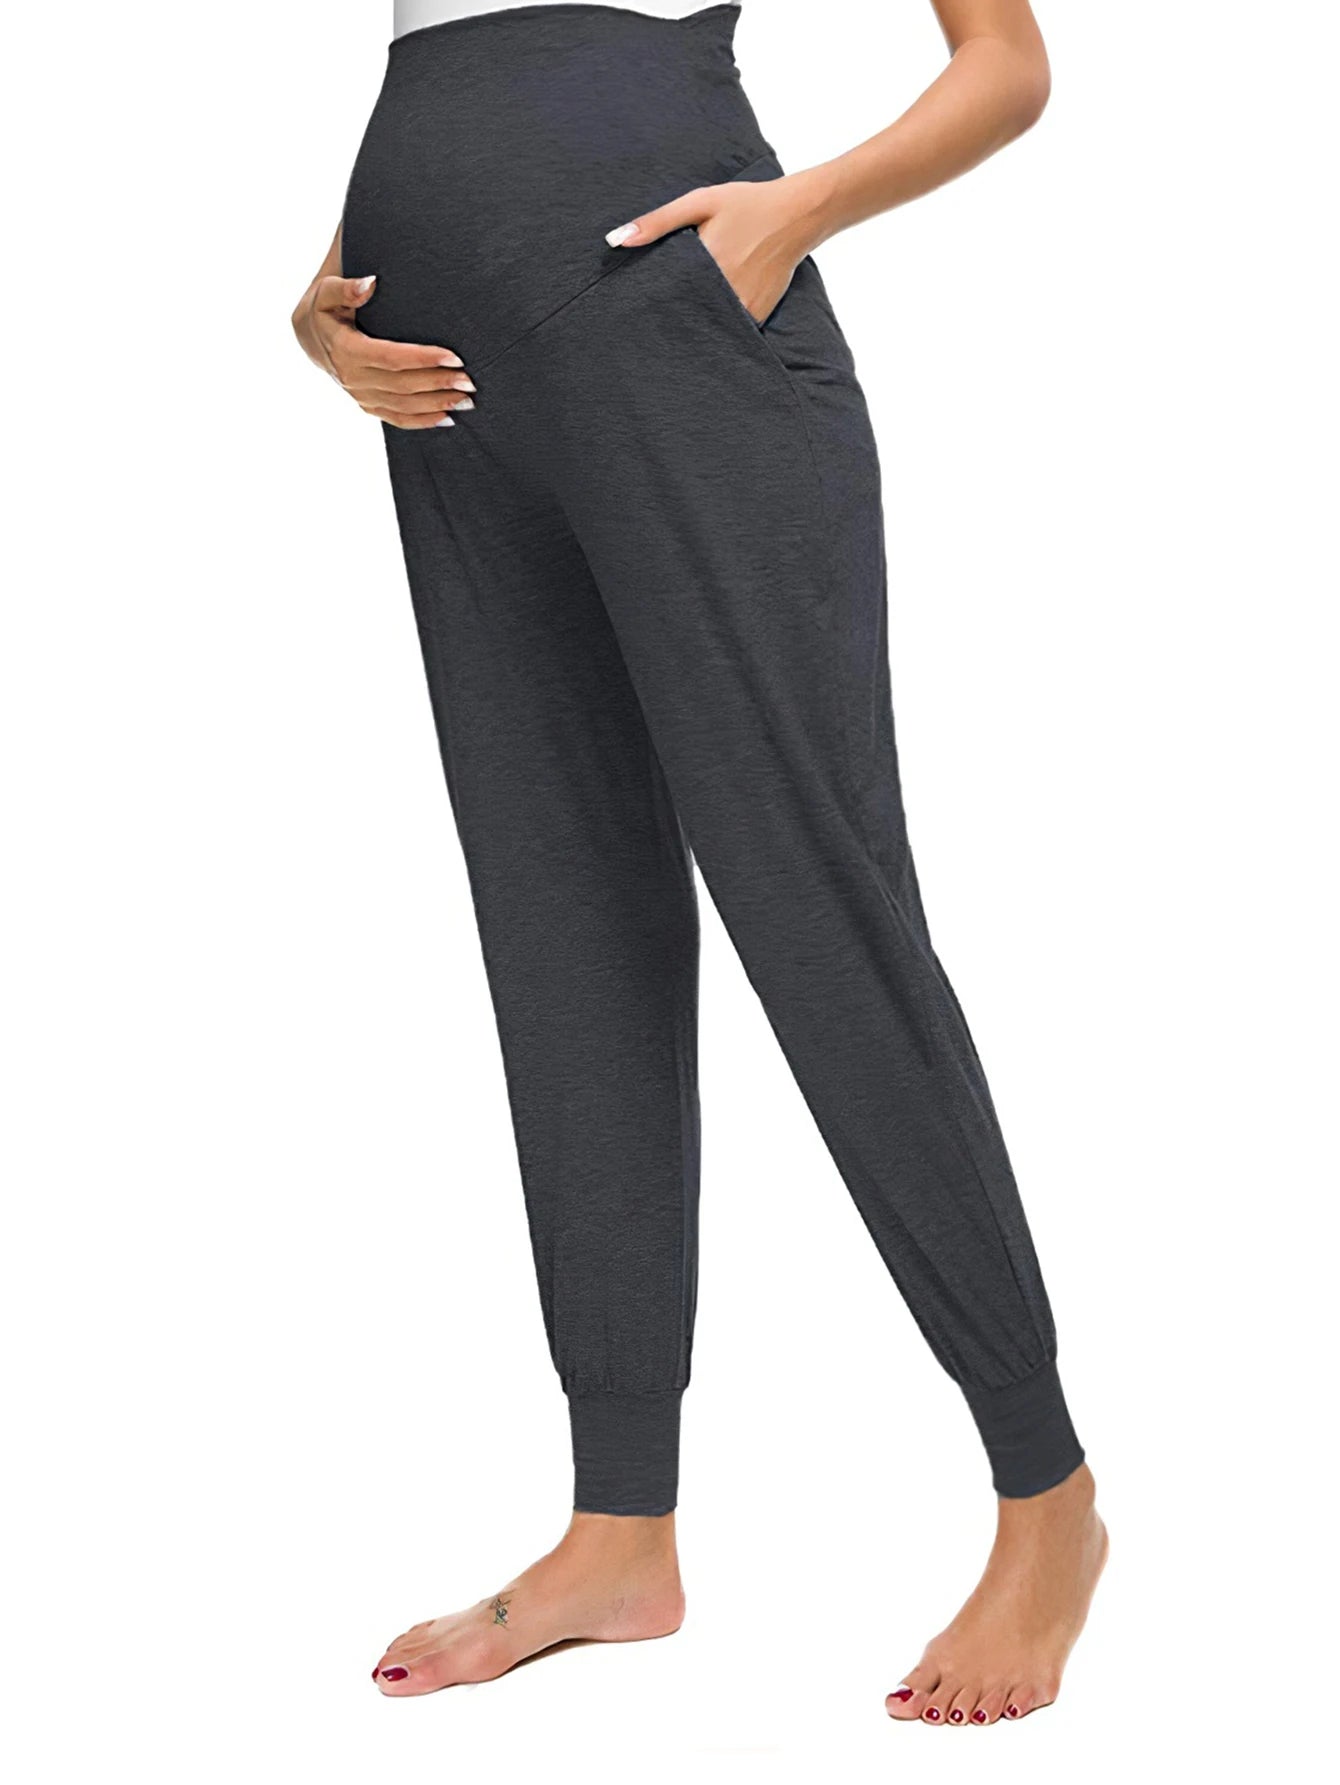 Ankle Cuff Maternity Pants Casual Home Sports